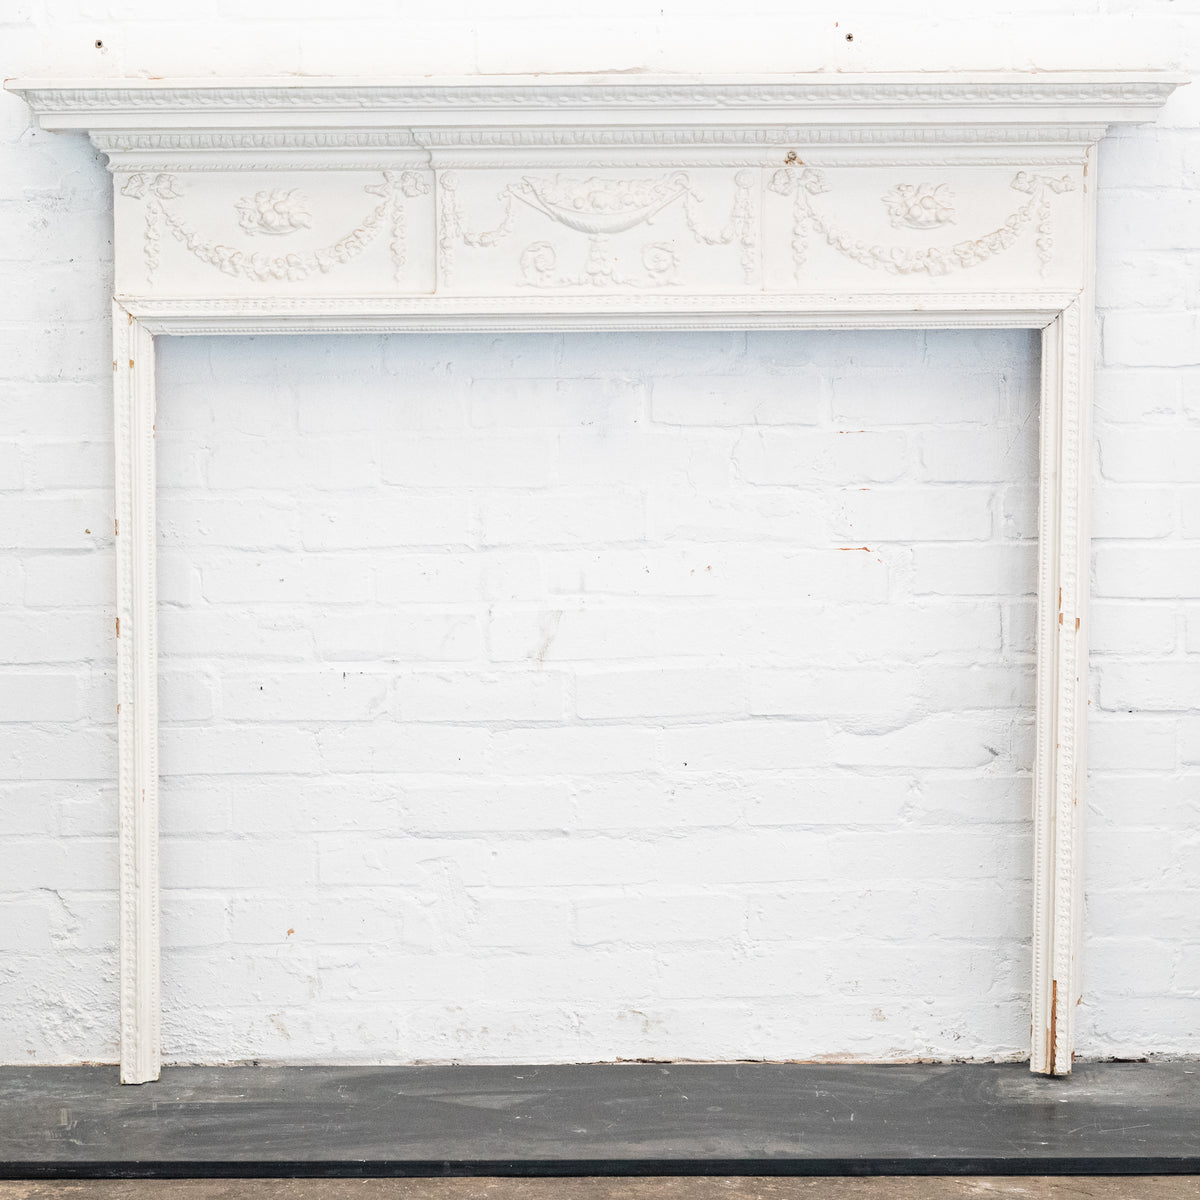 Antique Edwardian Wooden Fireplace Surround | The Architectural Forum